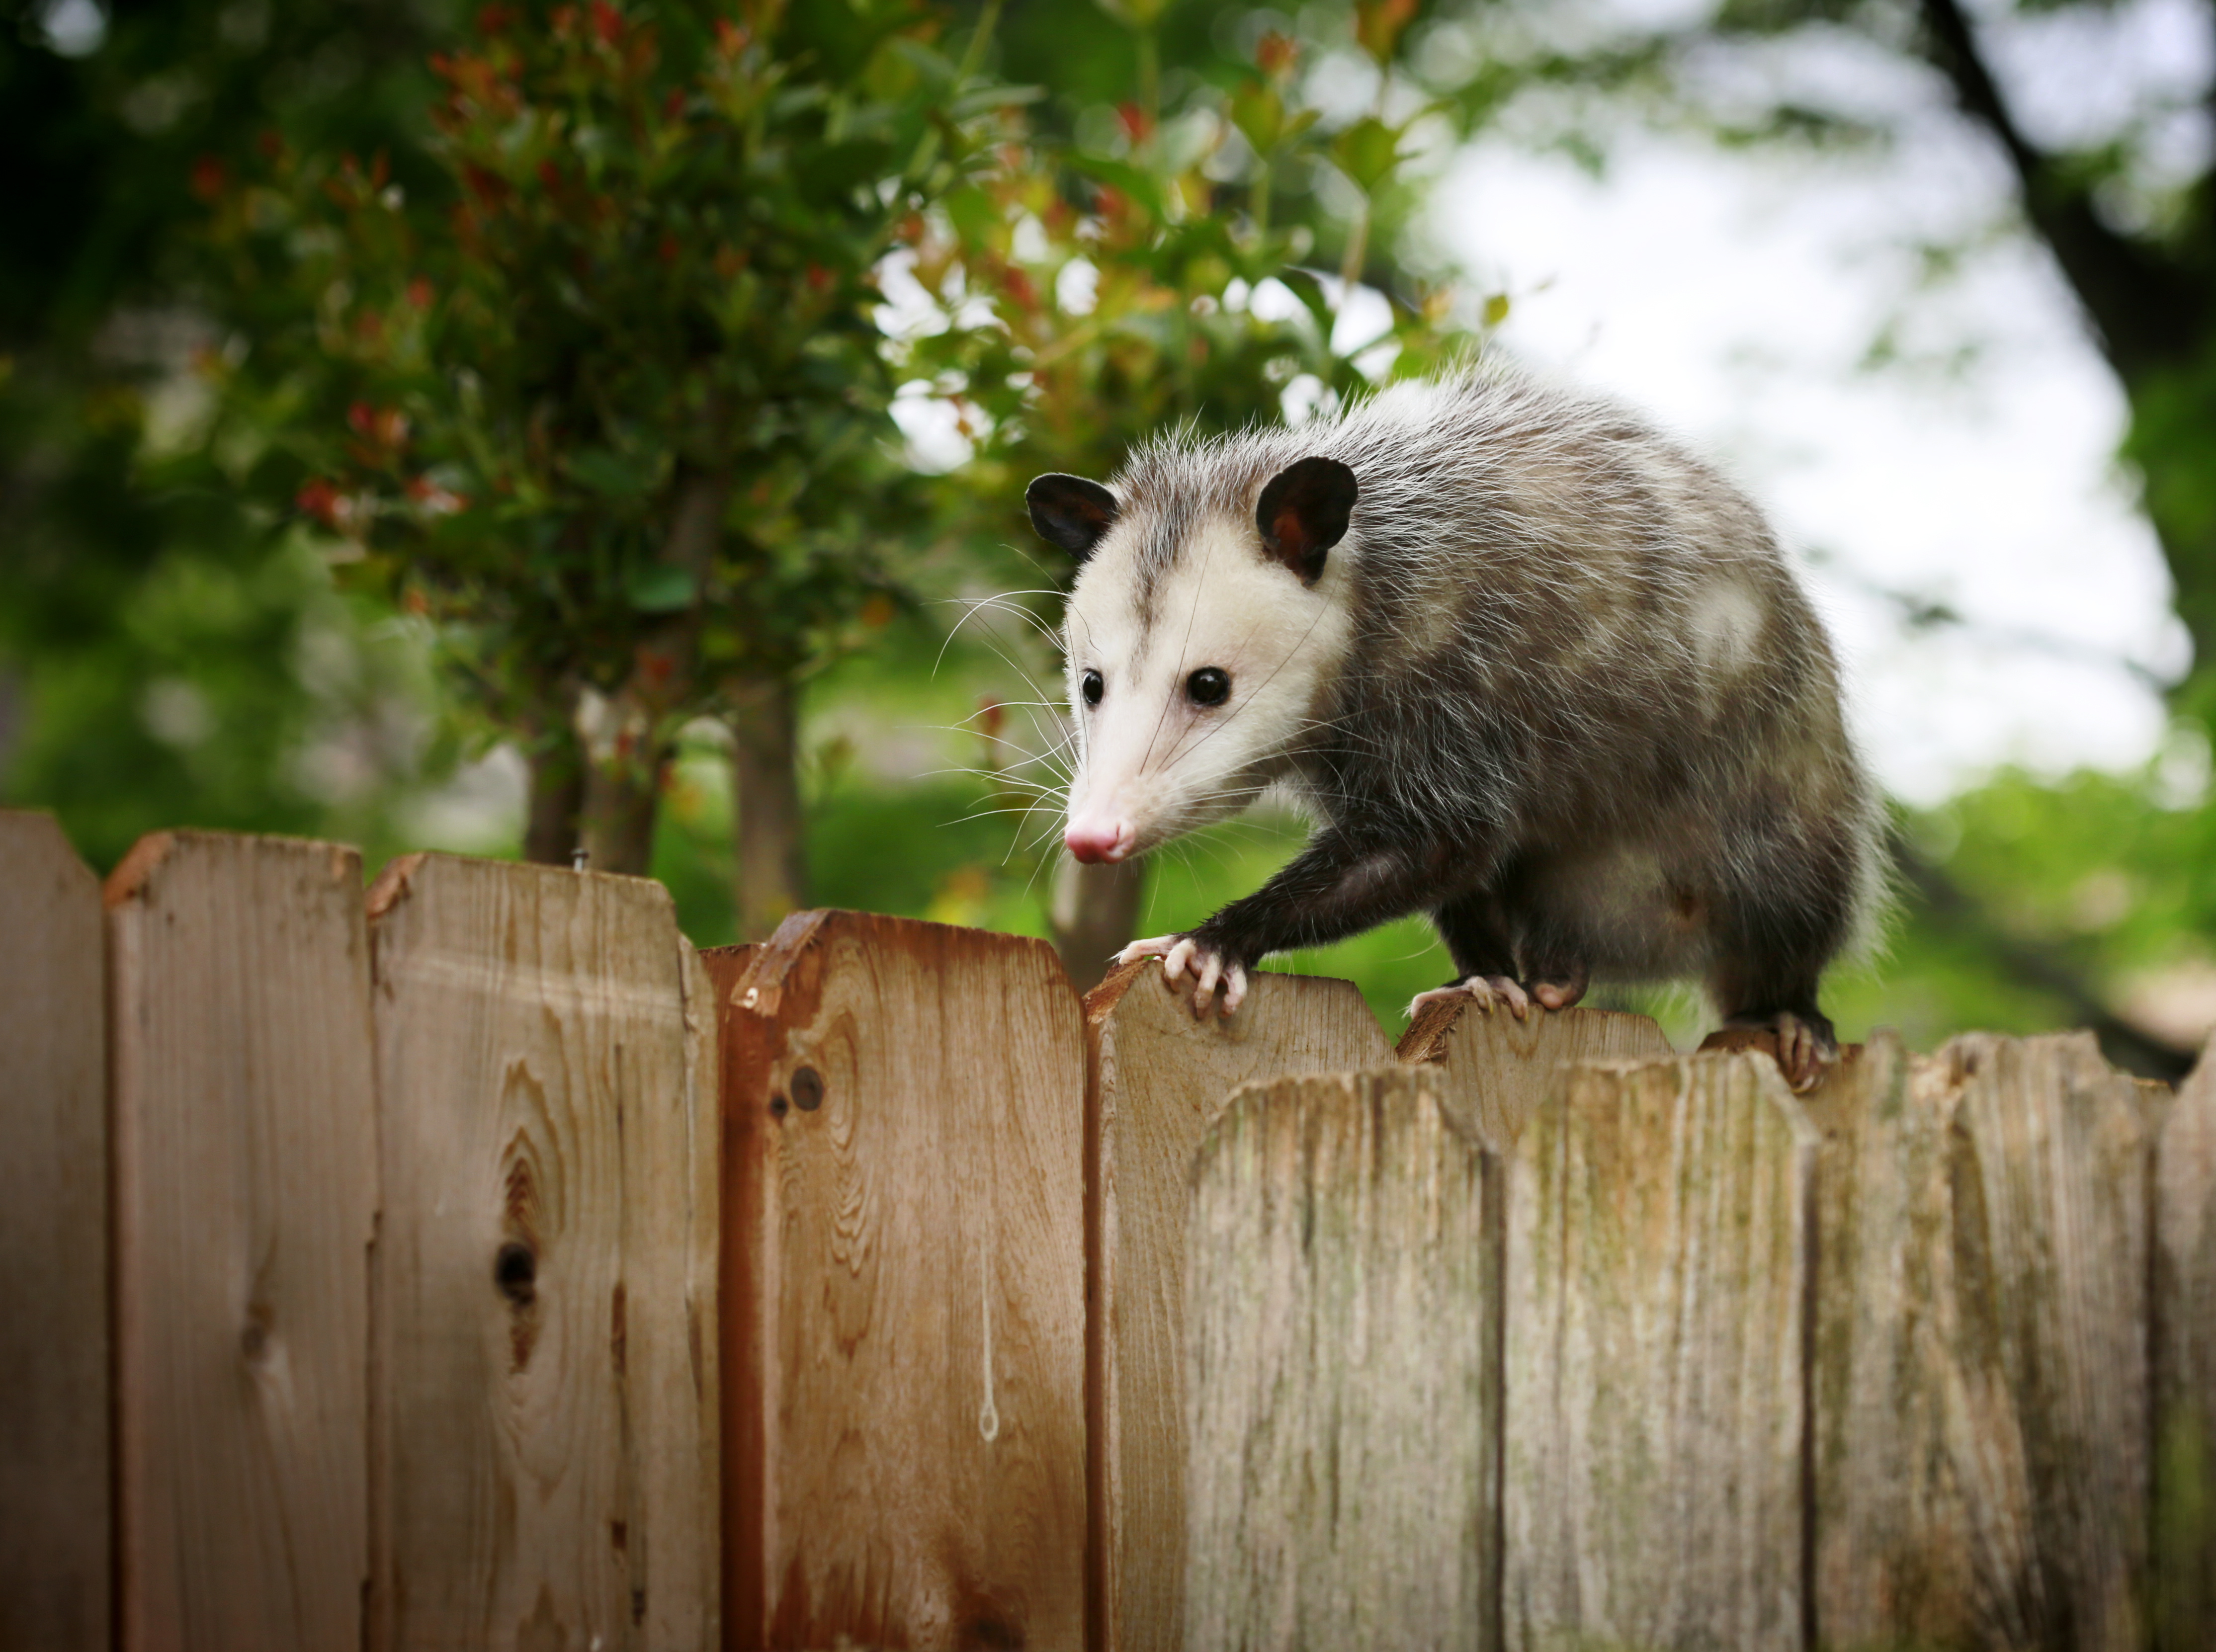 https://www.myheronhome.com/wildlife/wp-content/uploads/sites/7/2018/08/opossum-trapping-removal.jpeg